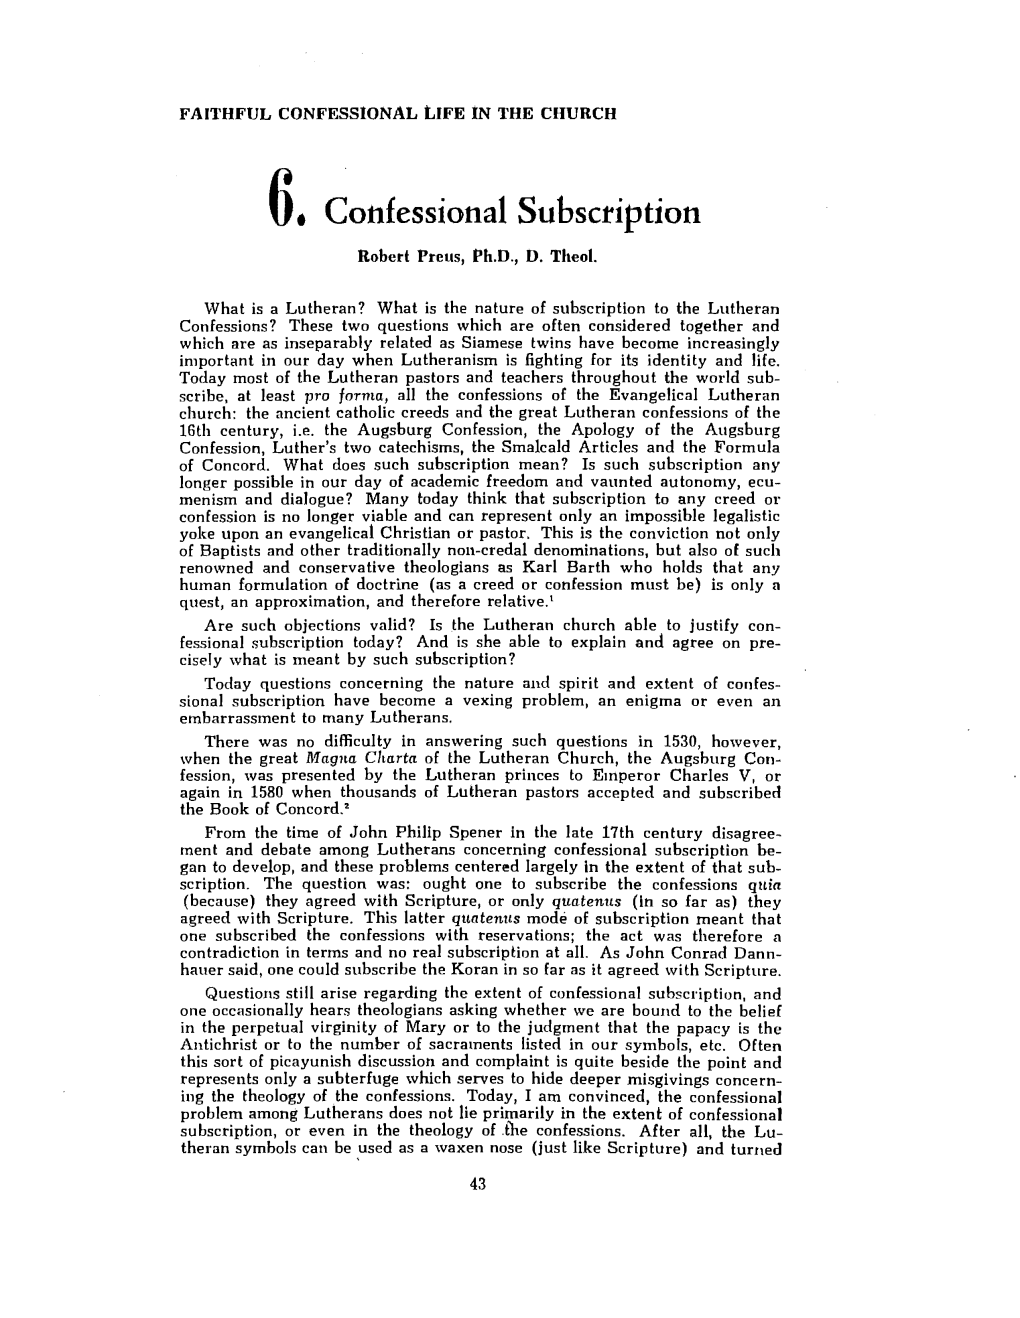 Confessional Subscription Be­ Gan to Develop, and These Problems Centered Largely in the Extent of That Sub­ Scription